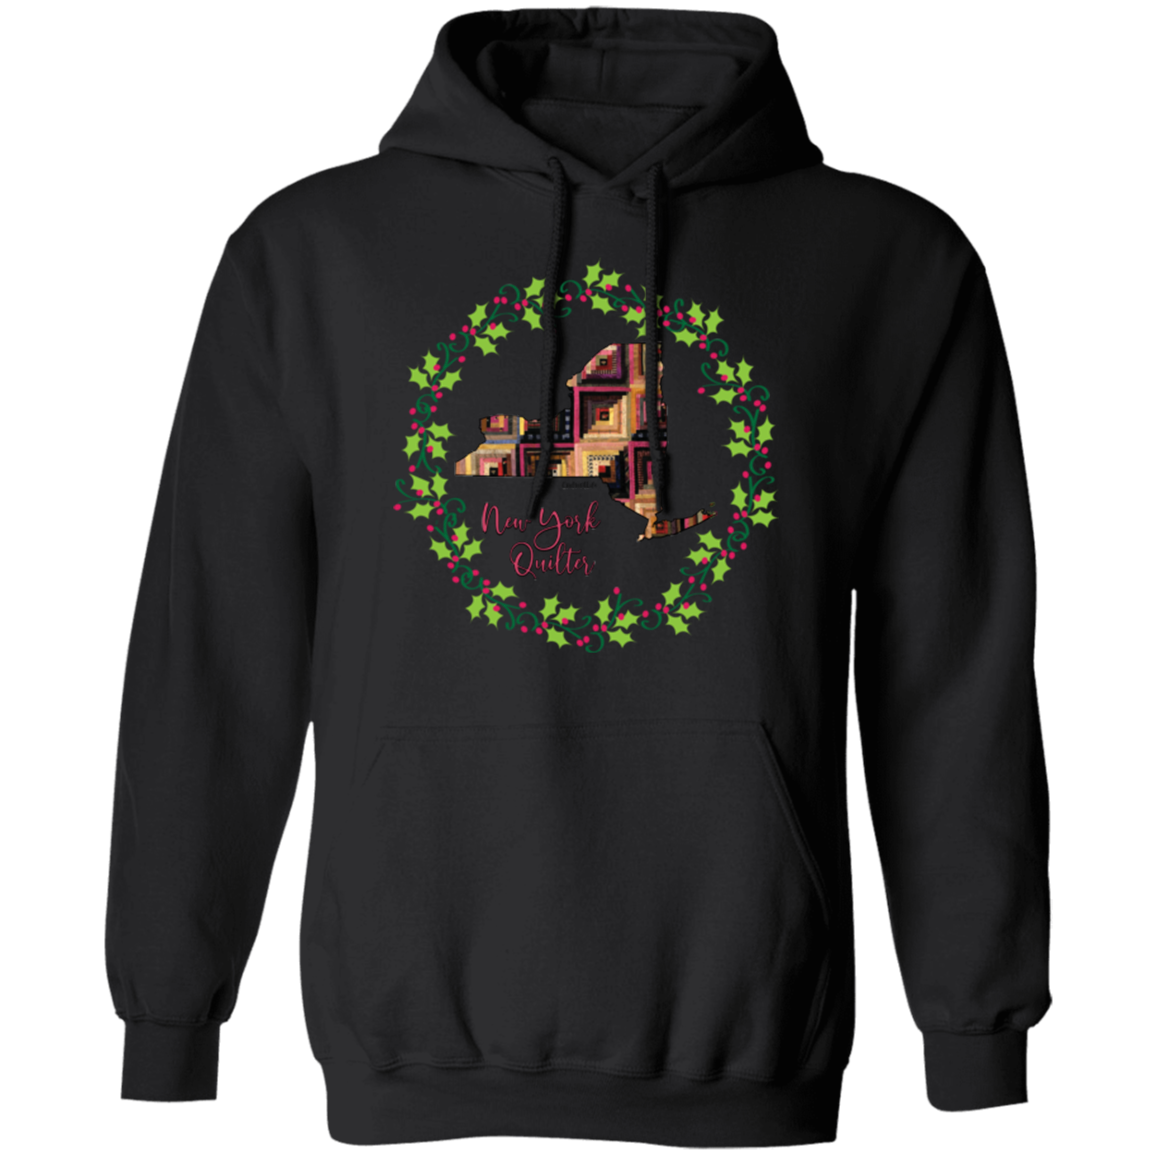 New York Quilter Christmas Pullover Hoodie